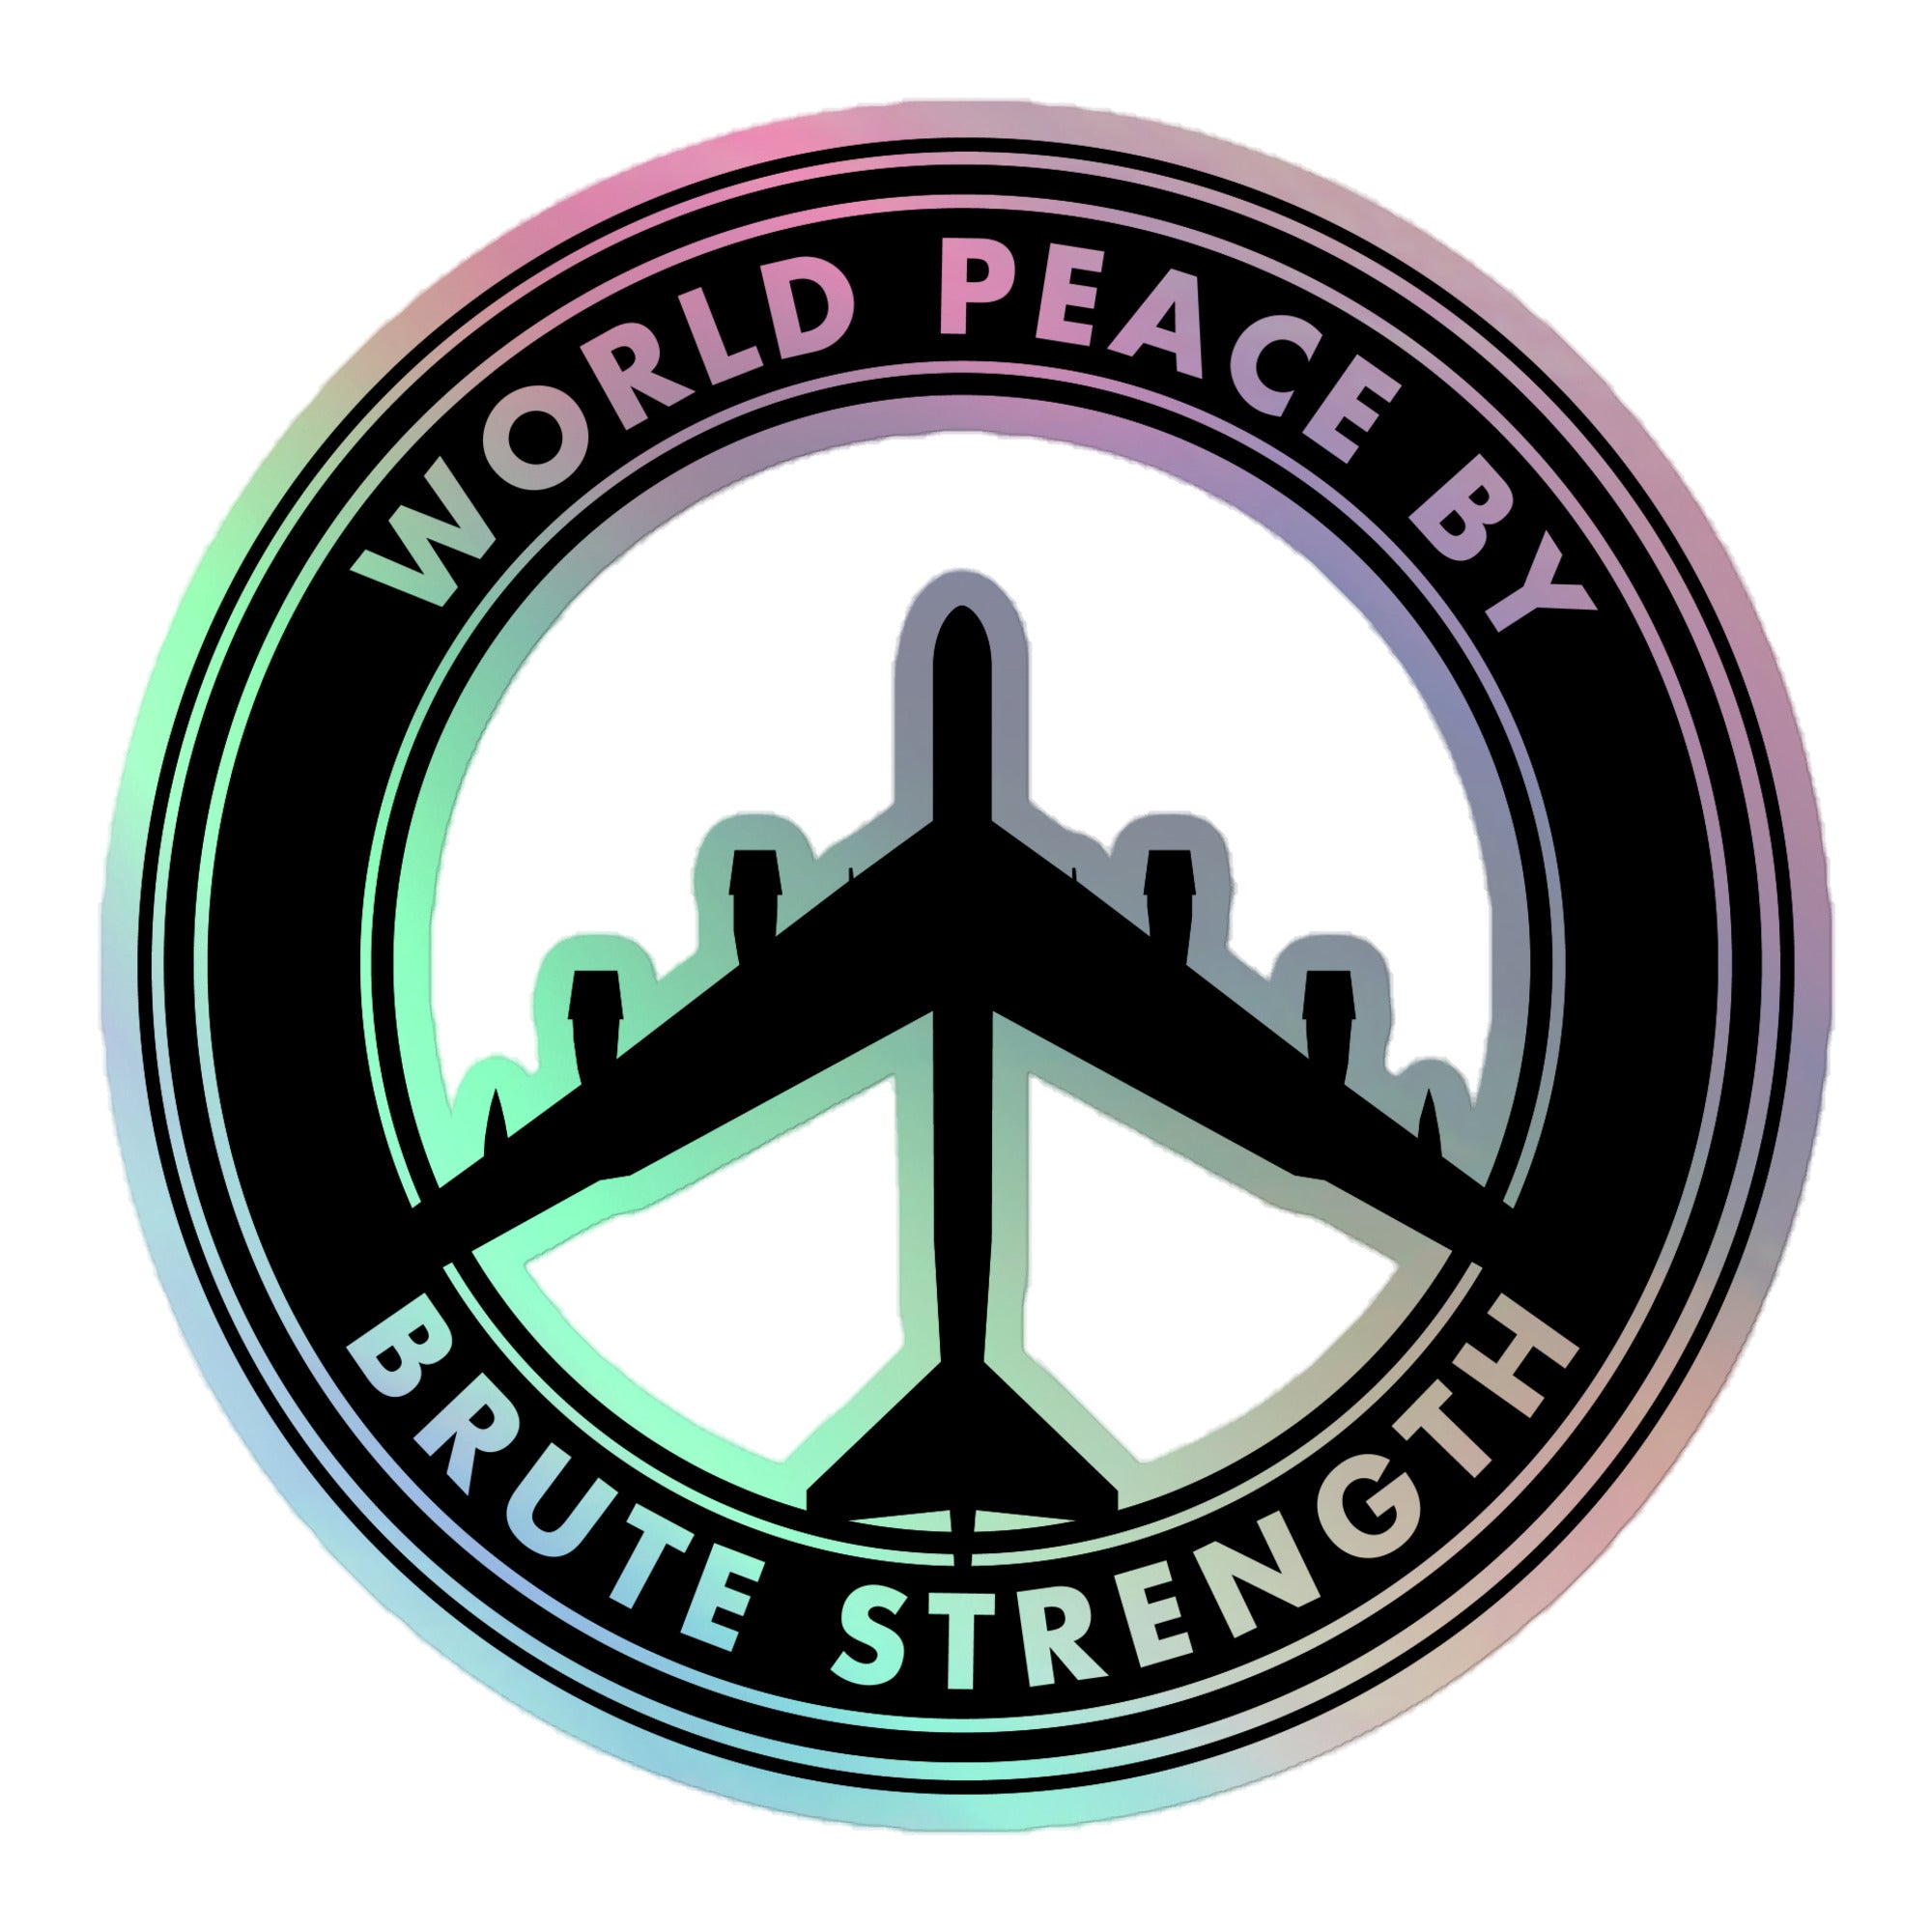 World Peace by Brute Strength Holographic stickers